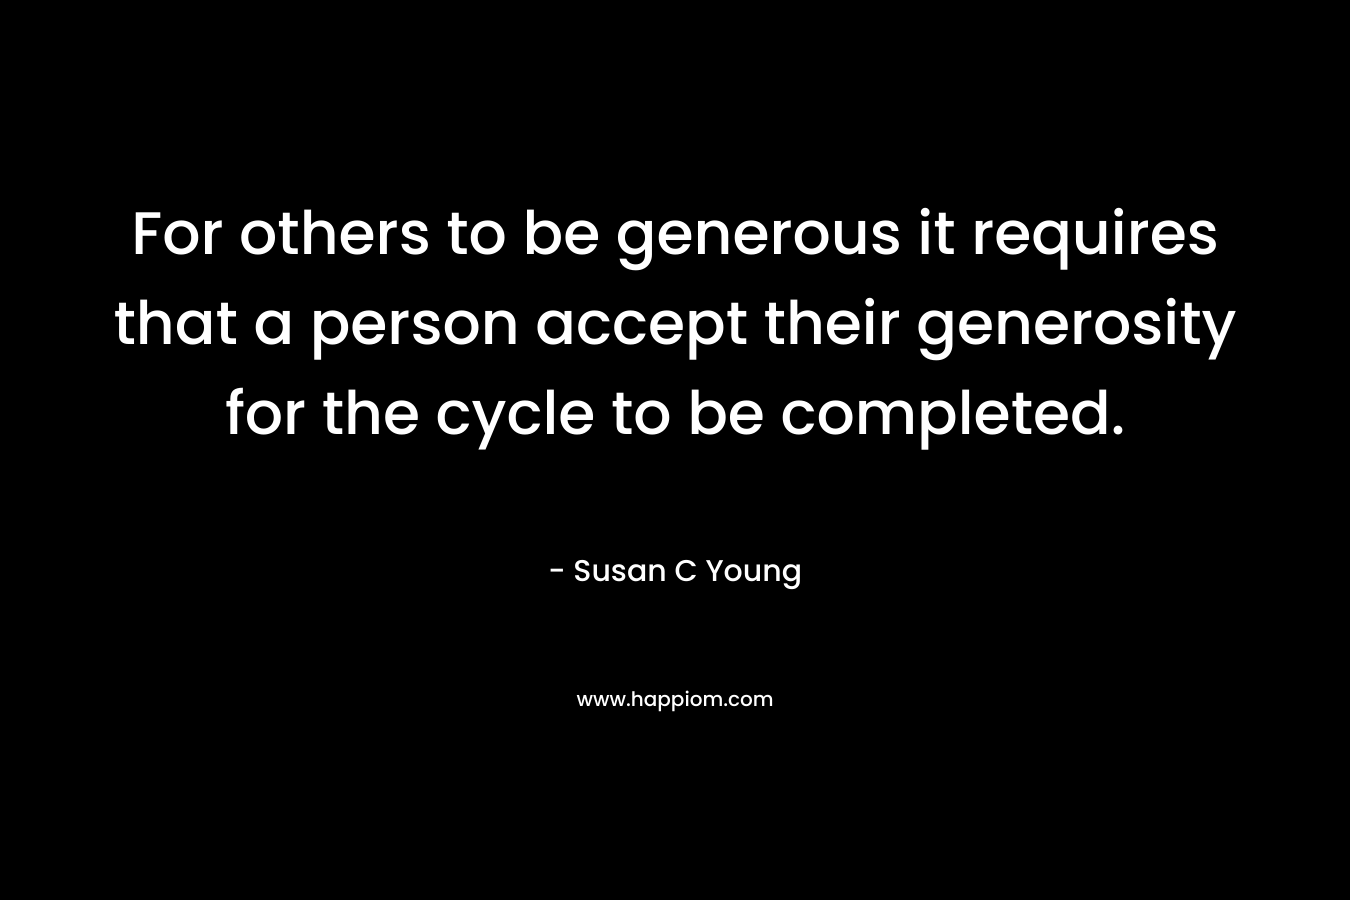 For others to be generous it requires that a person accept their generosity for the cycle to be completed.